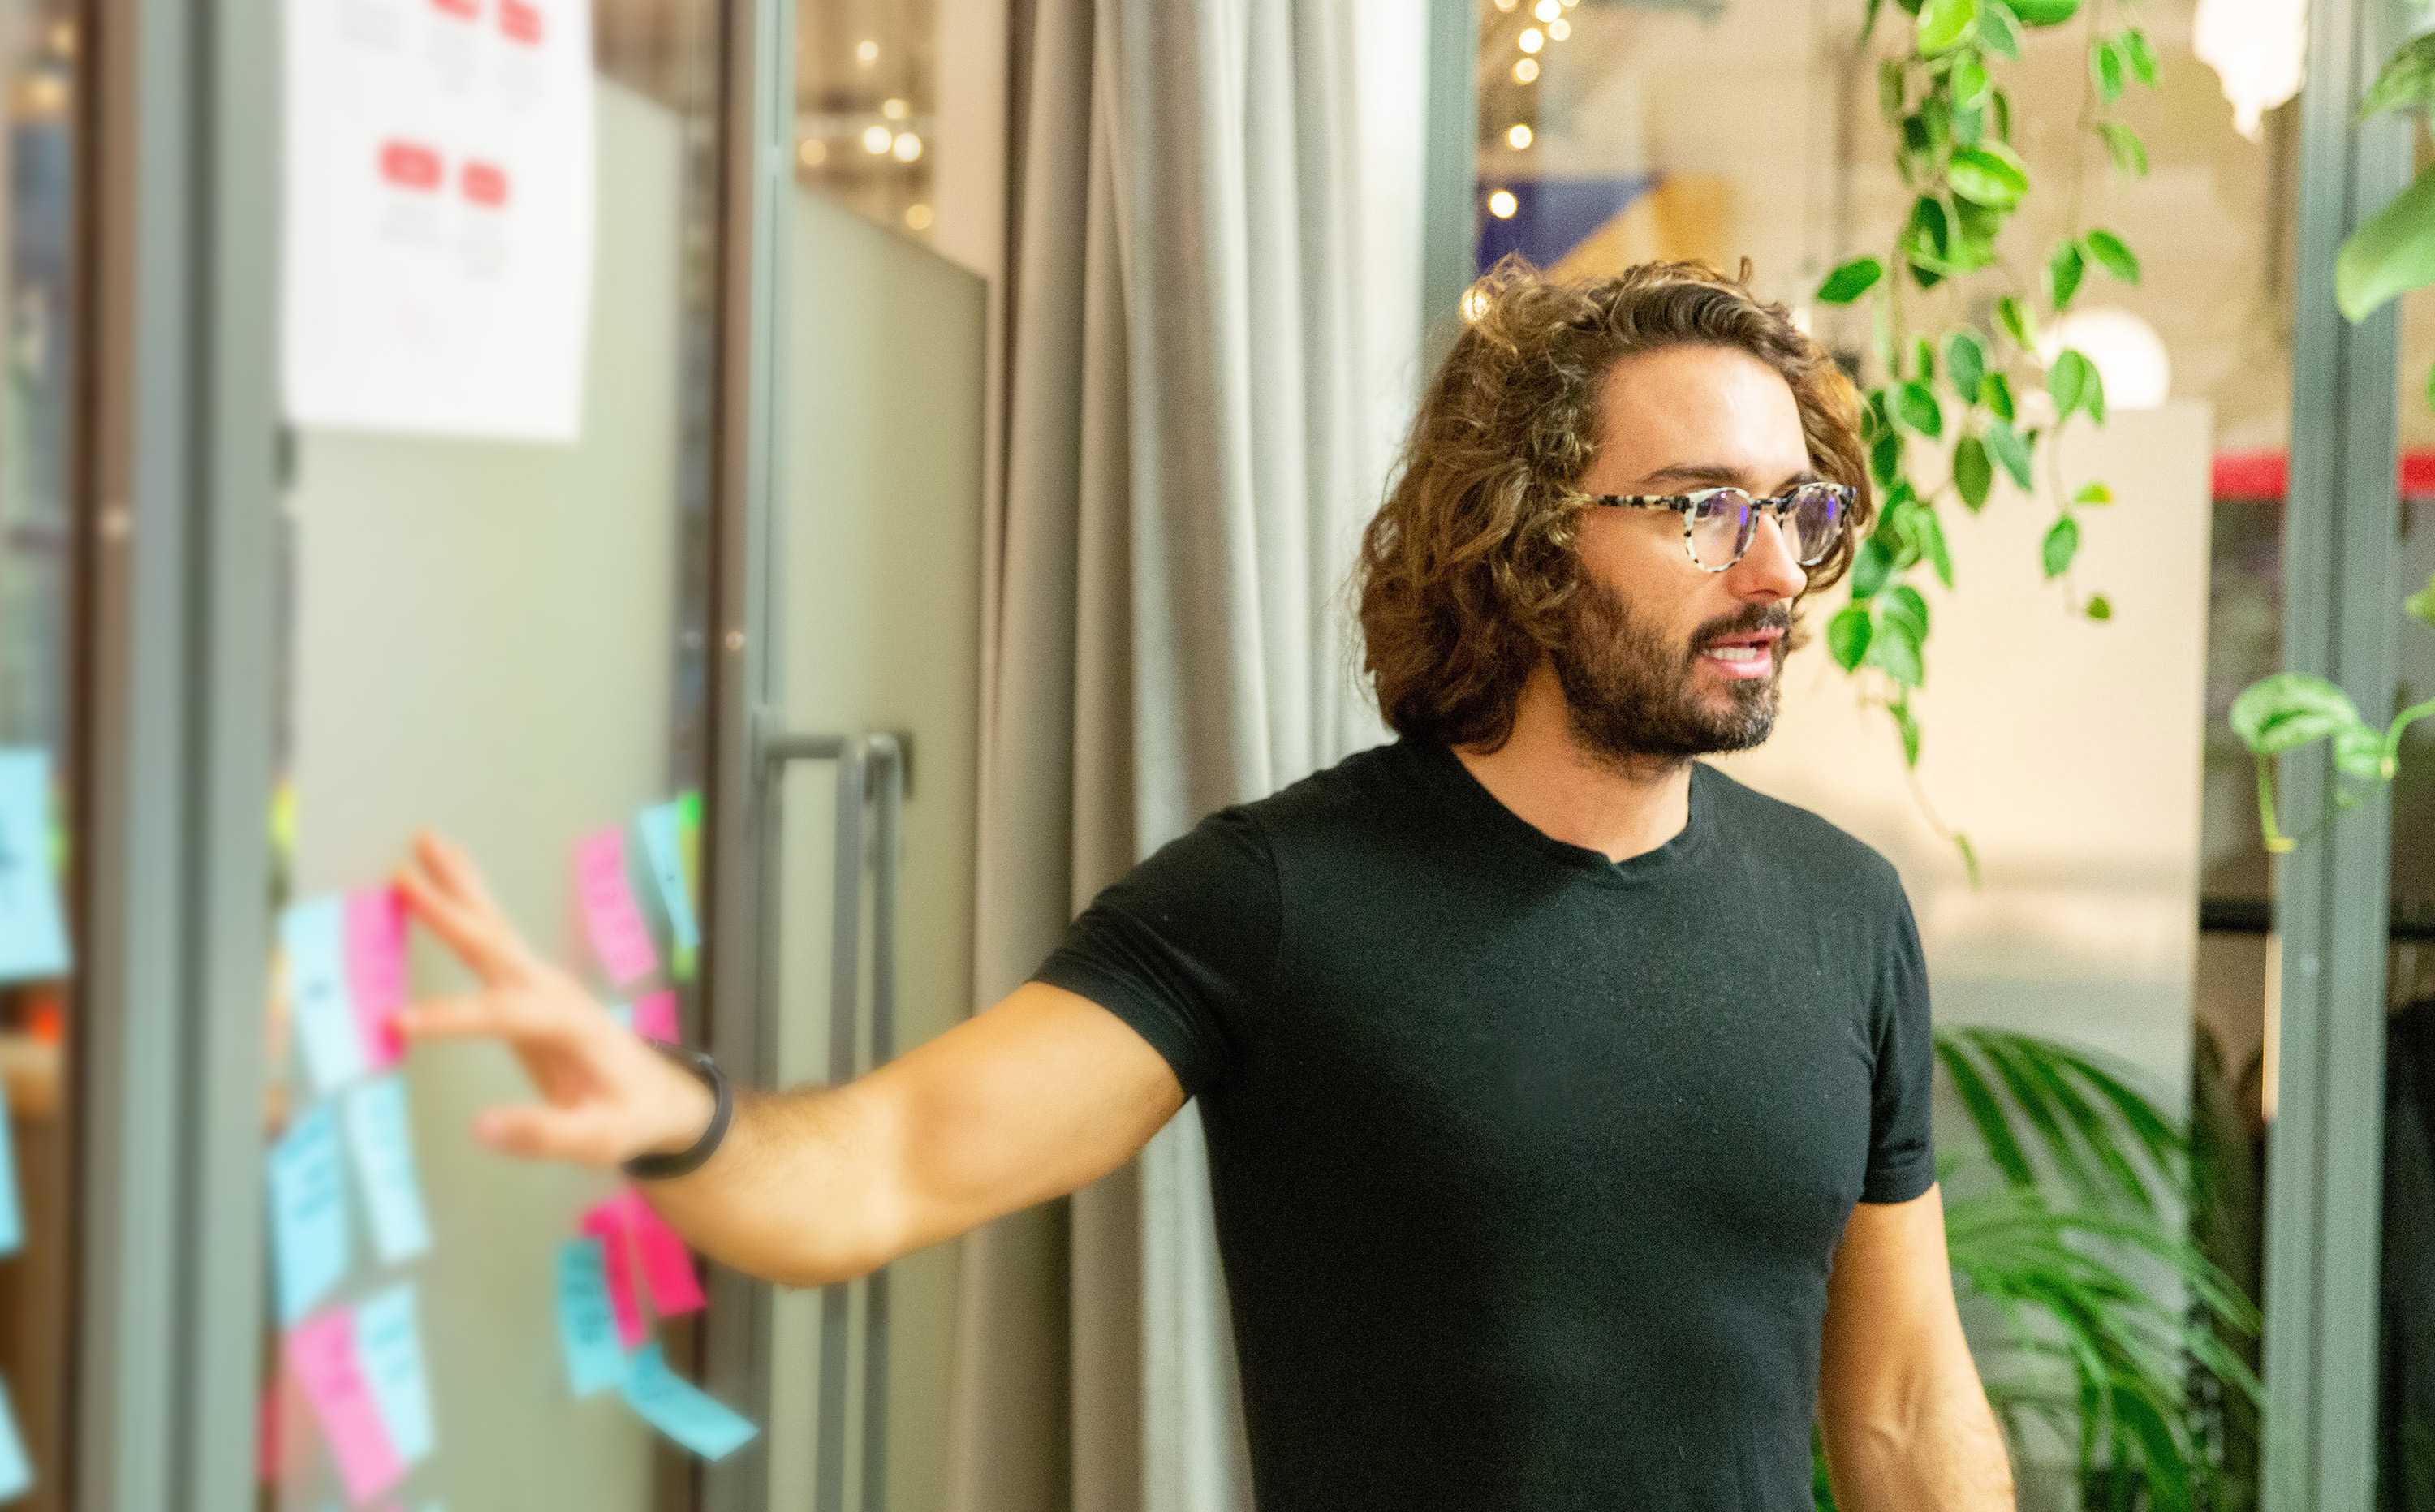 Joe Wicks, the body coach, working with our team